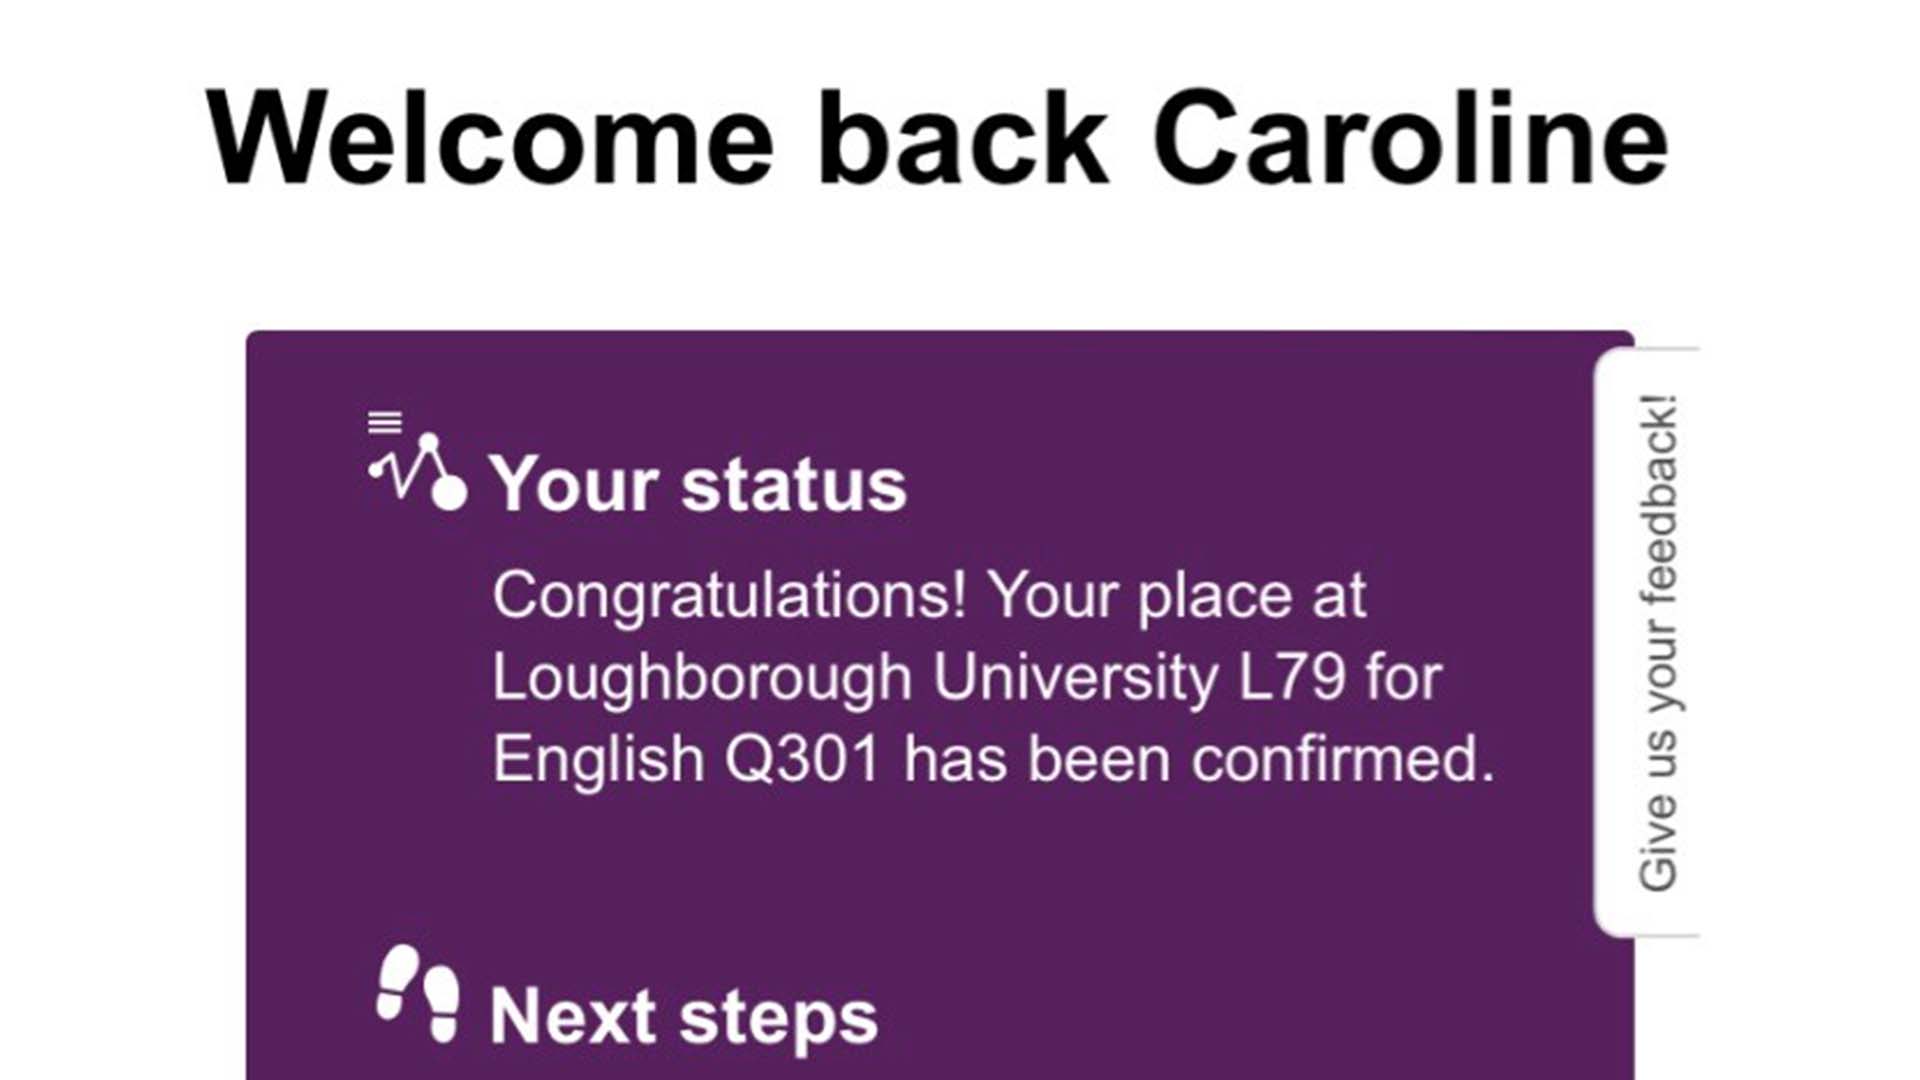 Caroline's UCAS confirmation status reading 'Congratulations! Your place at Loughborough University for English has been confirmed'. 